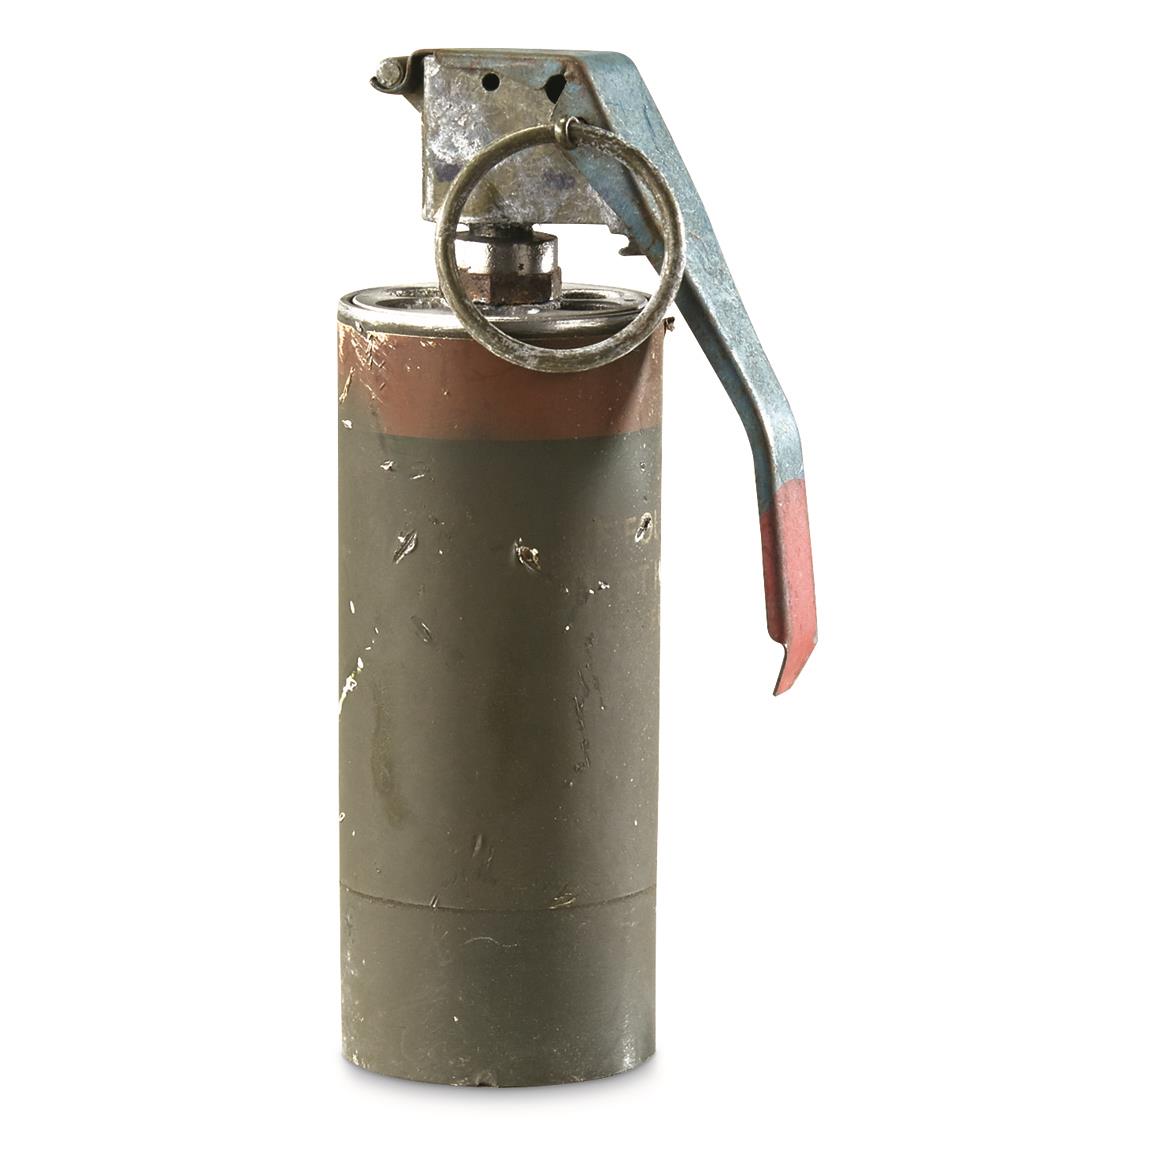 U S Military Surplus Dummy Flashbang Grenade Used Dummy Rounds Grenade Shells At Sportsman S Guide